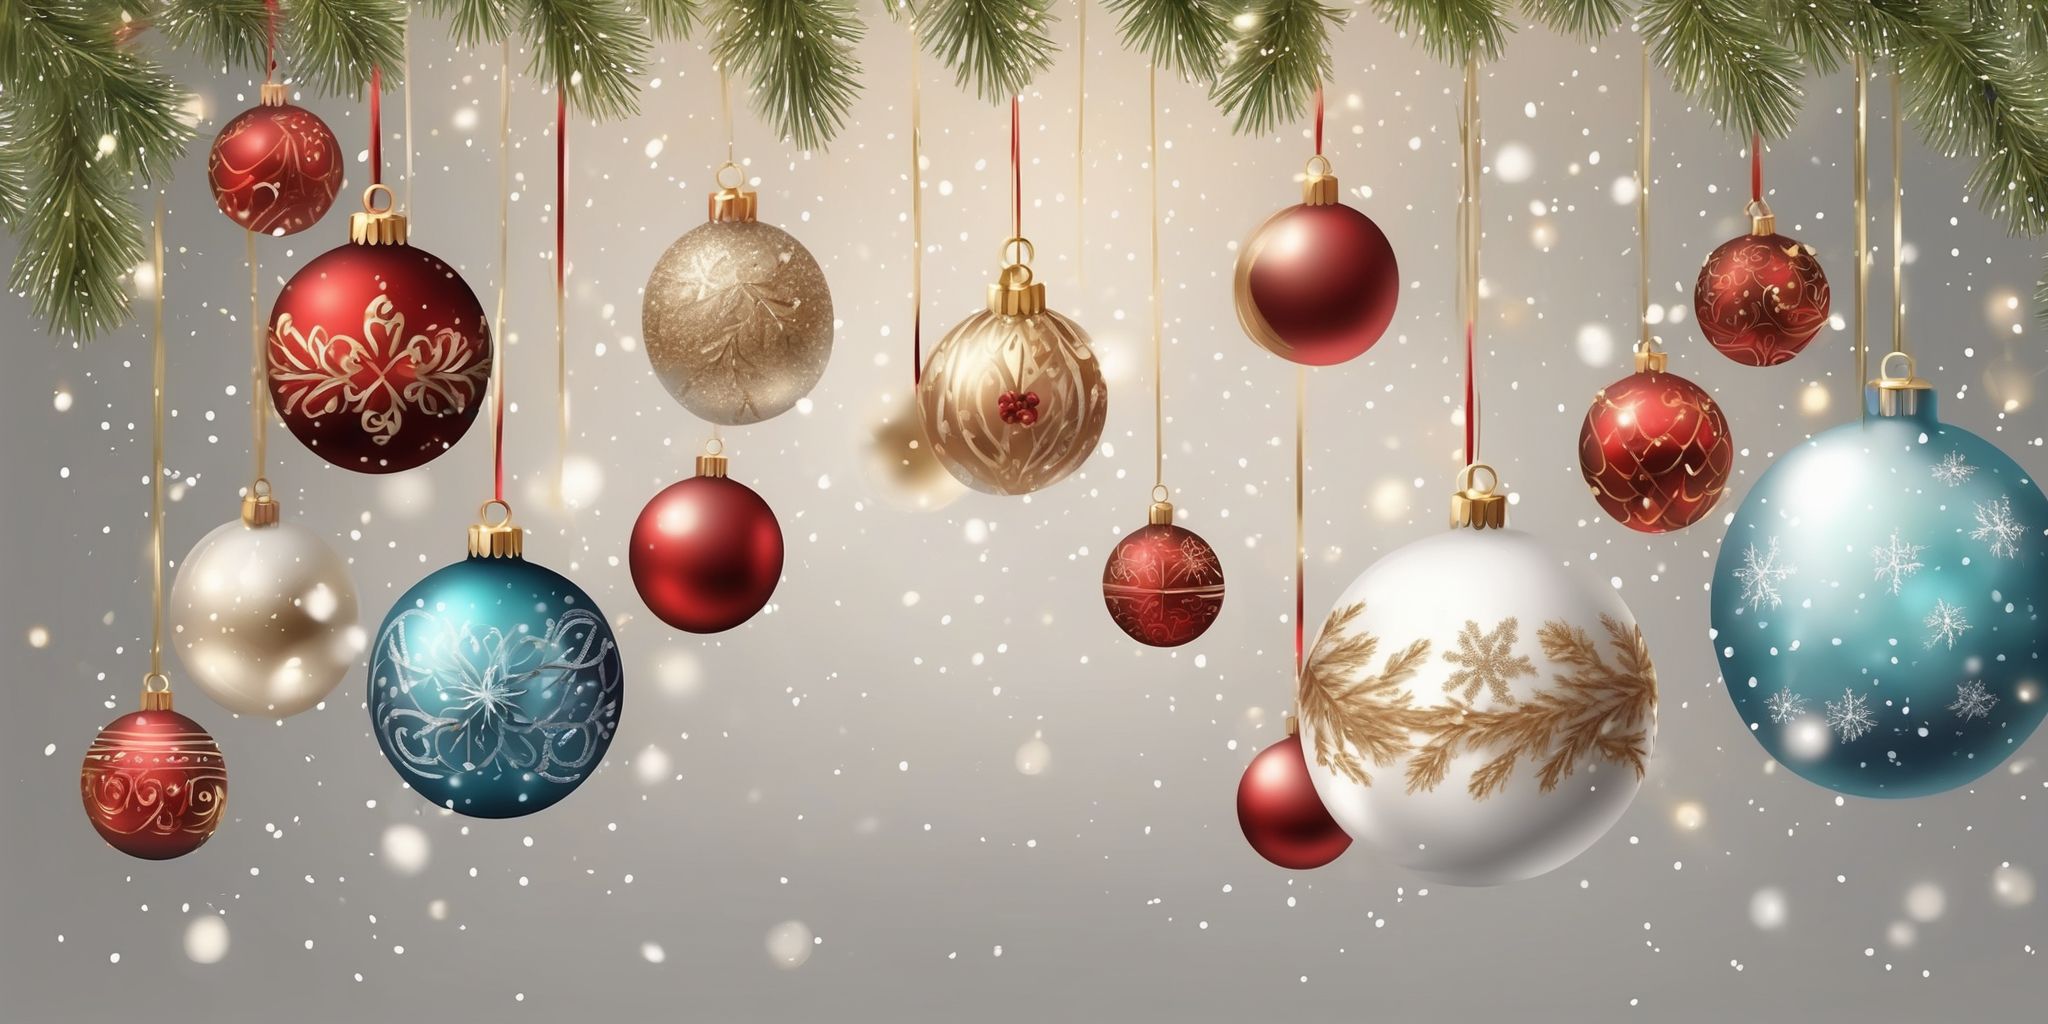 Baubles in realistic Christmas style